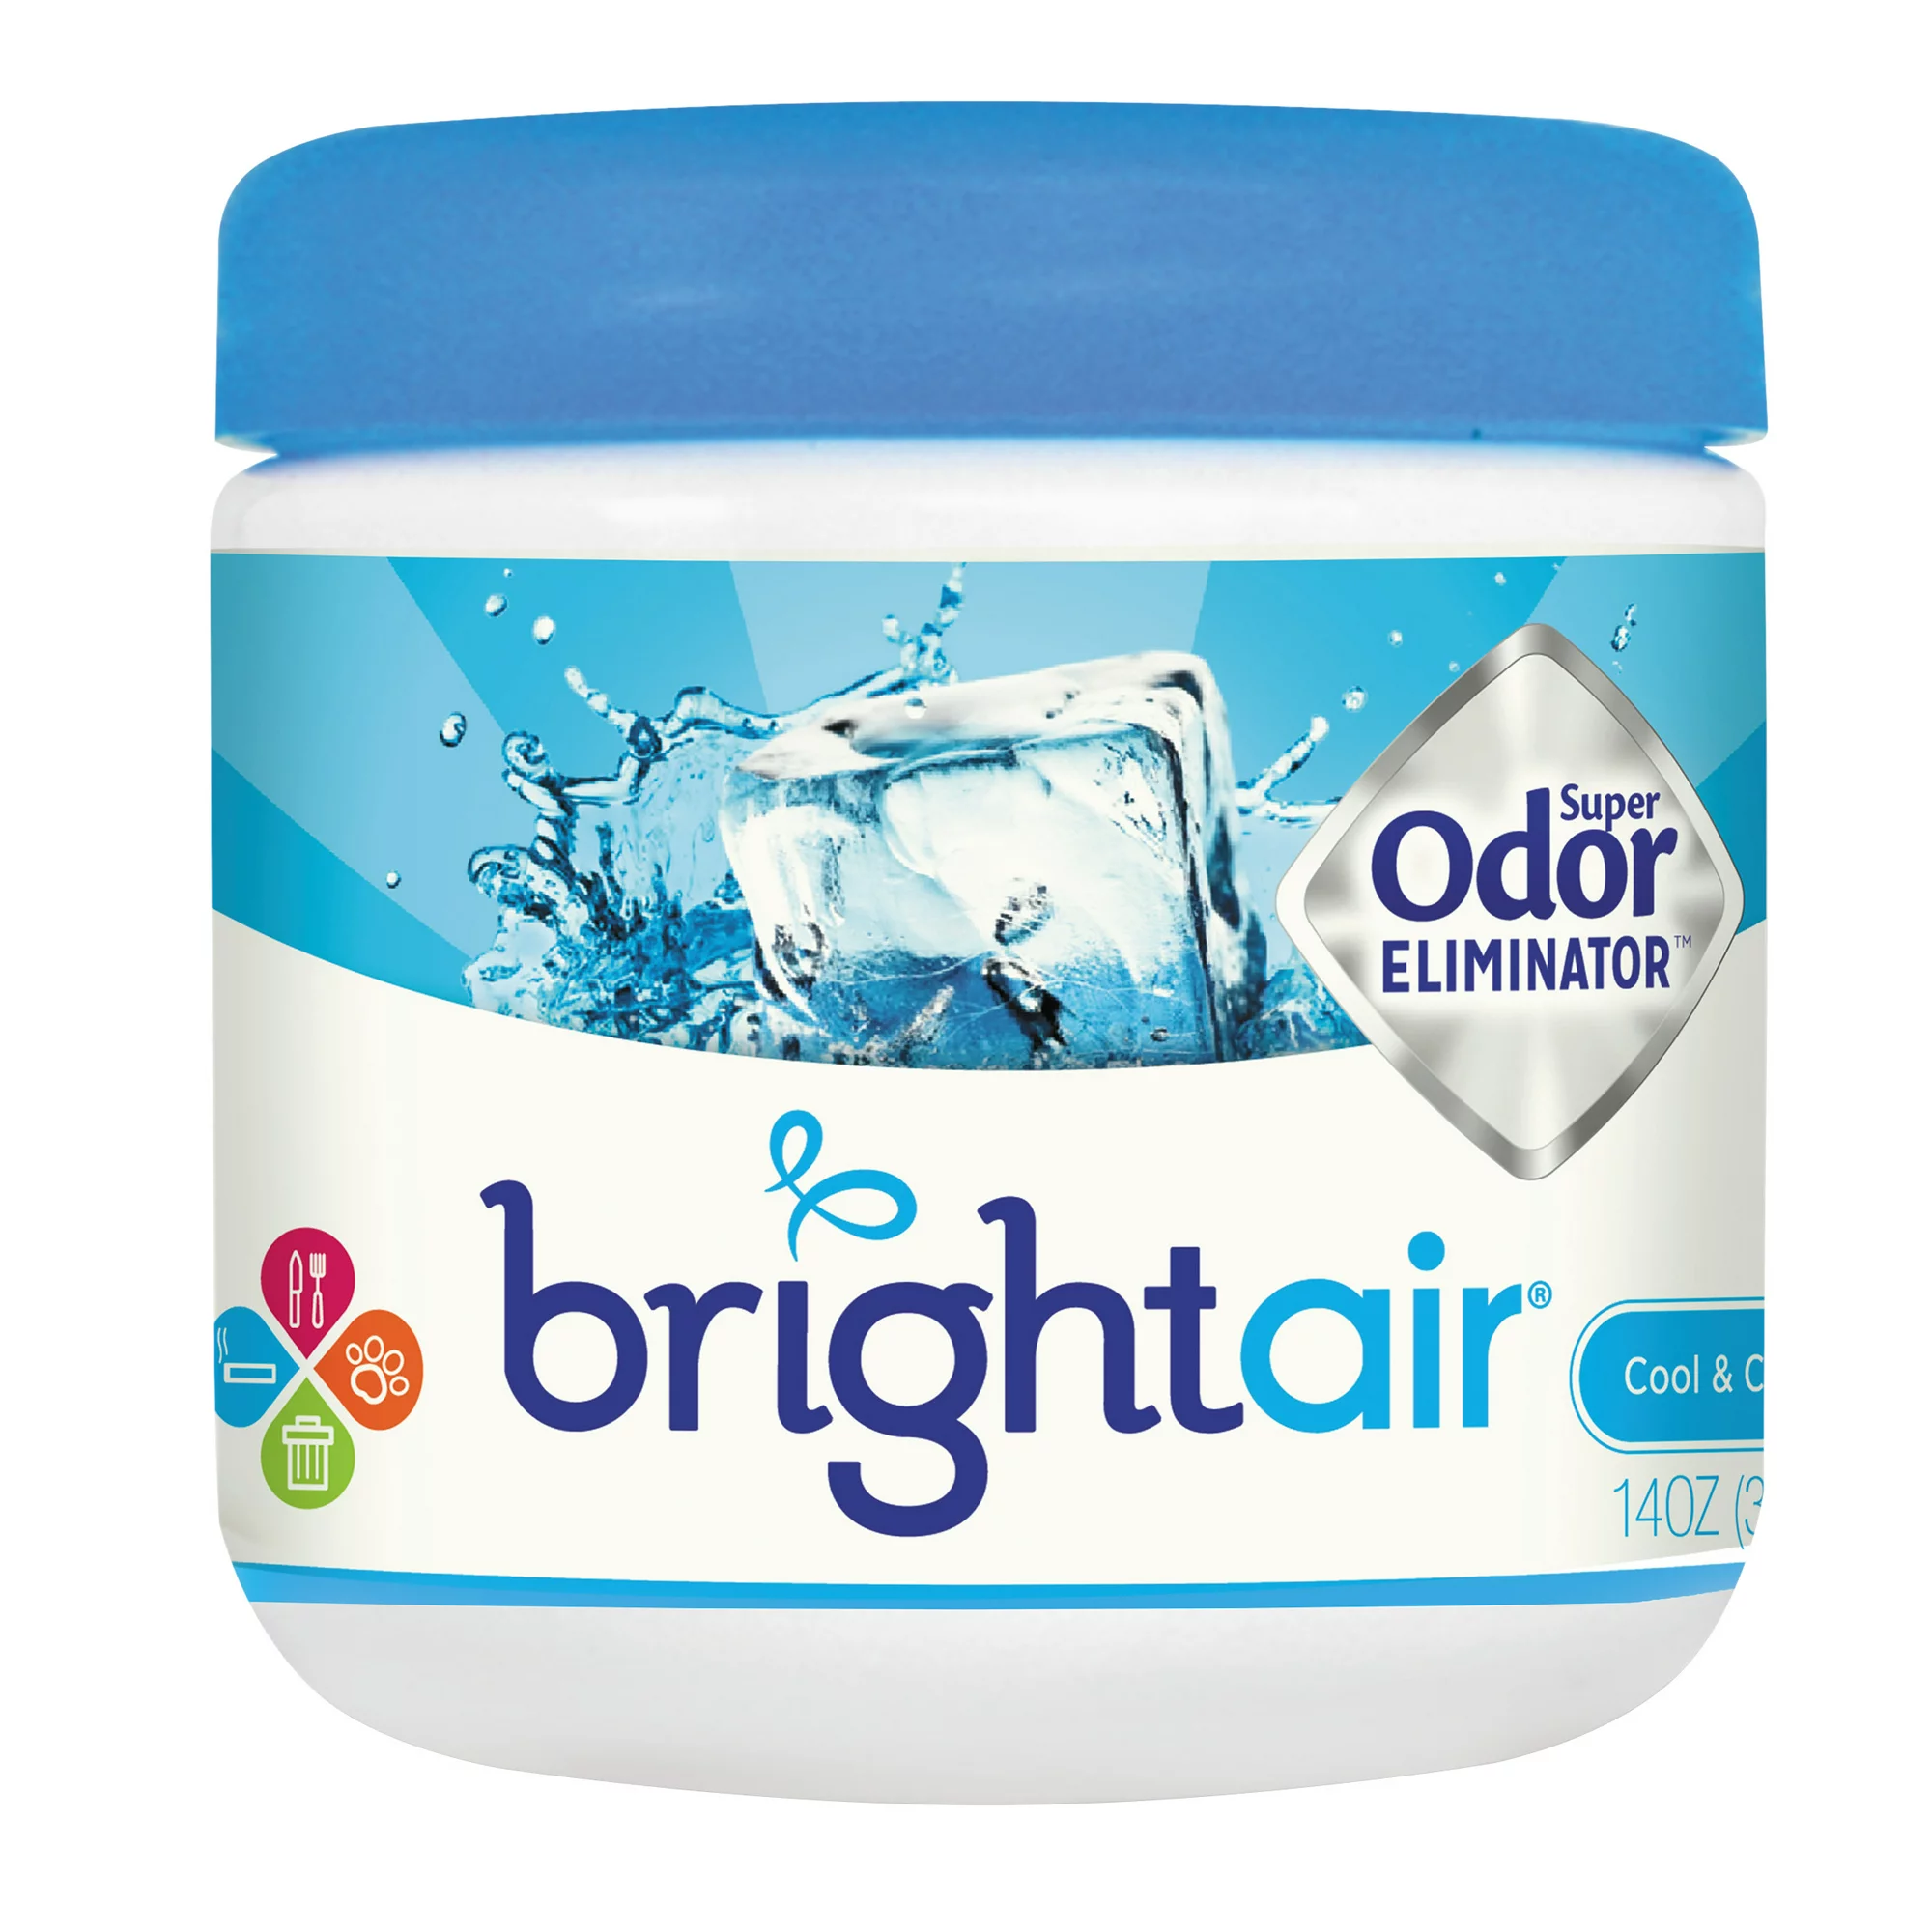 Clear the air with Bright Air super odor eliminator